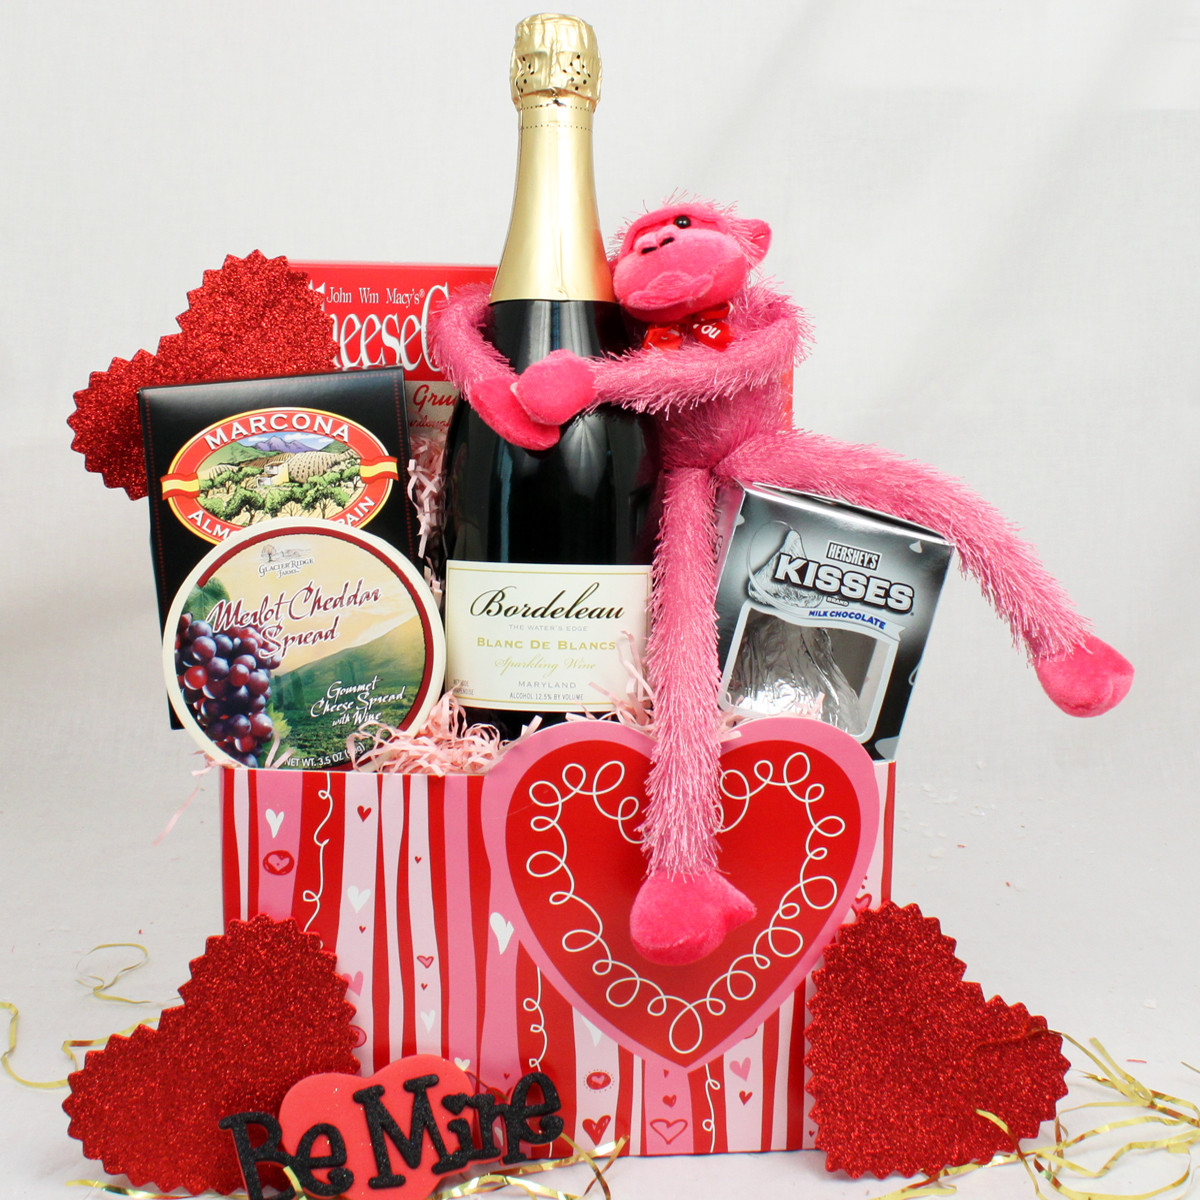 Homemade Valentine Gift Ideas for Her Lovely Creative and thoughtful Valentine’s Day Gifts for Her